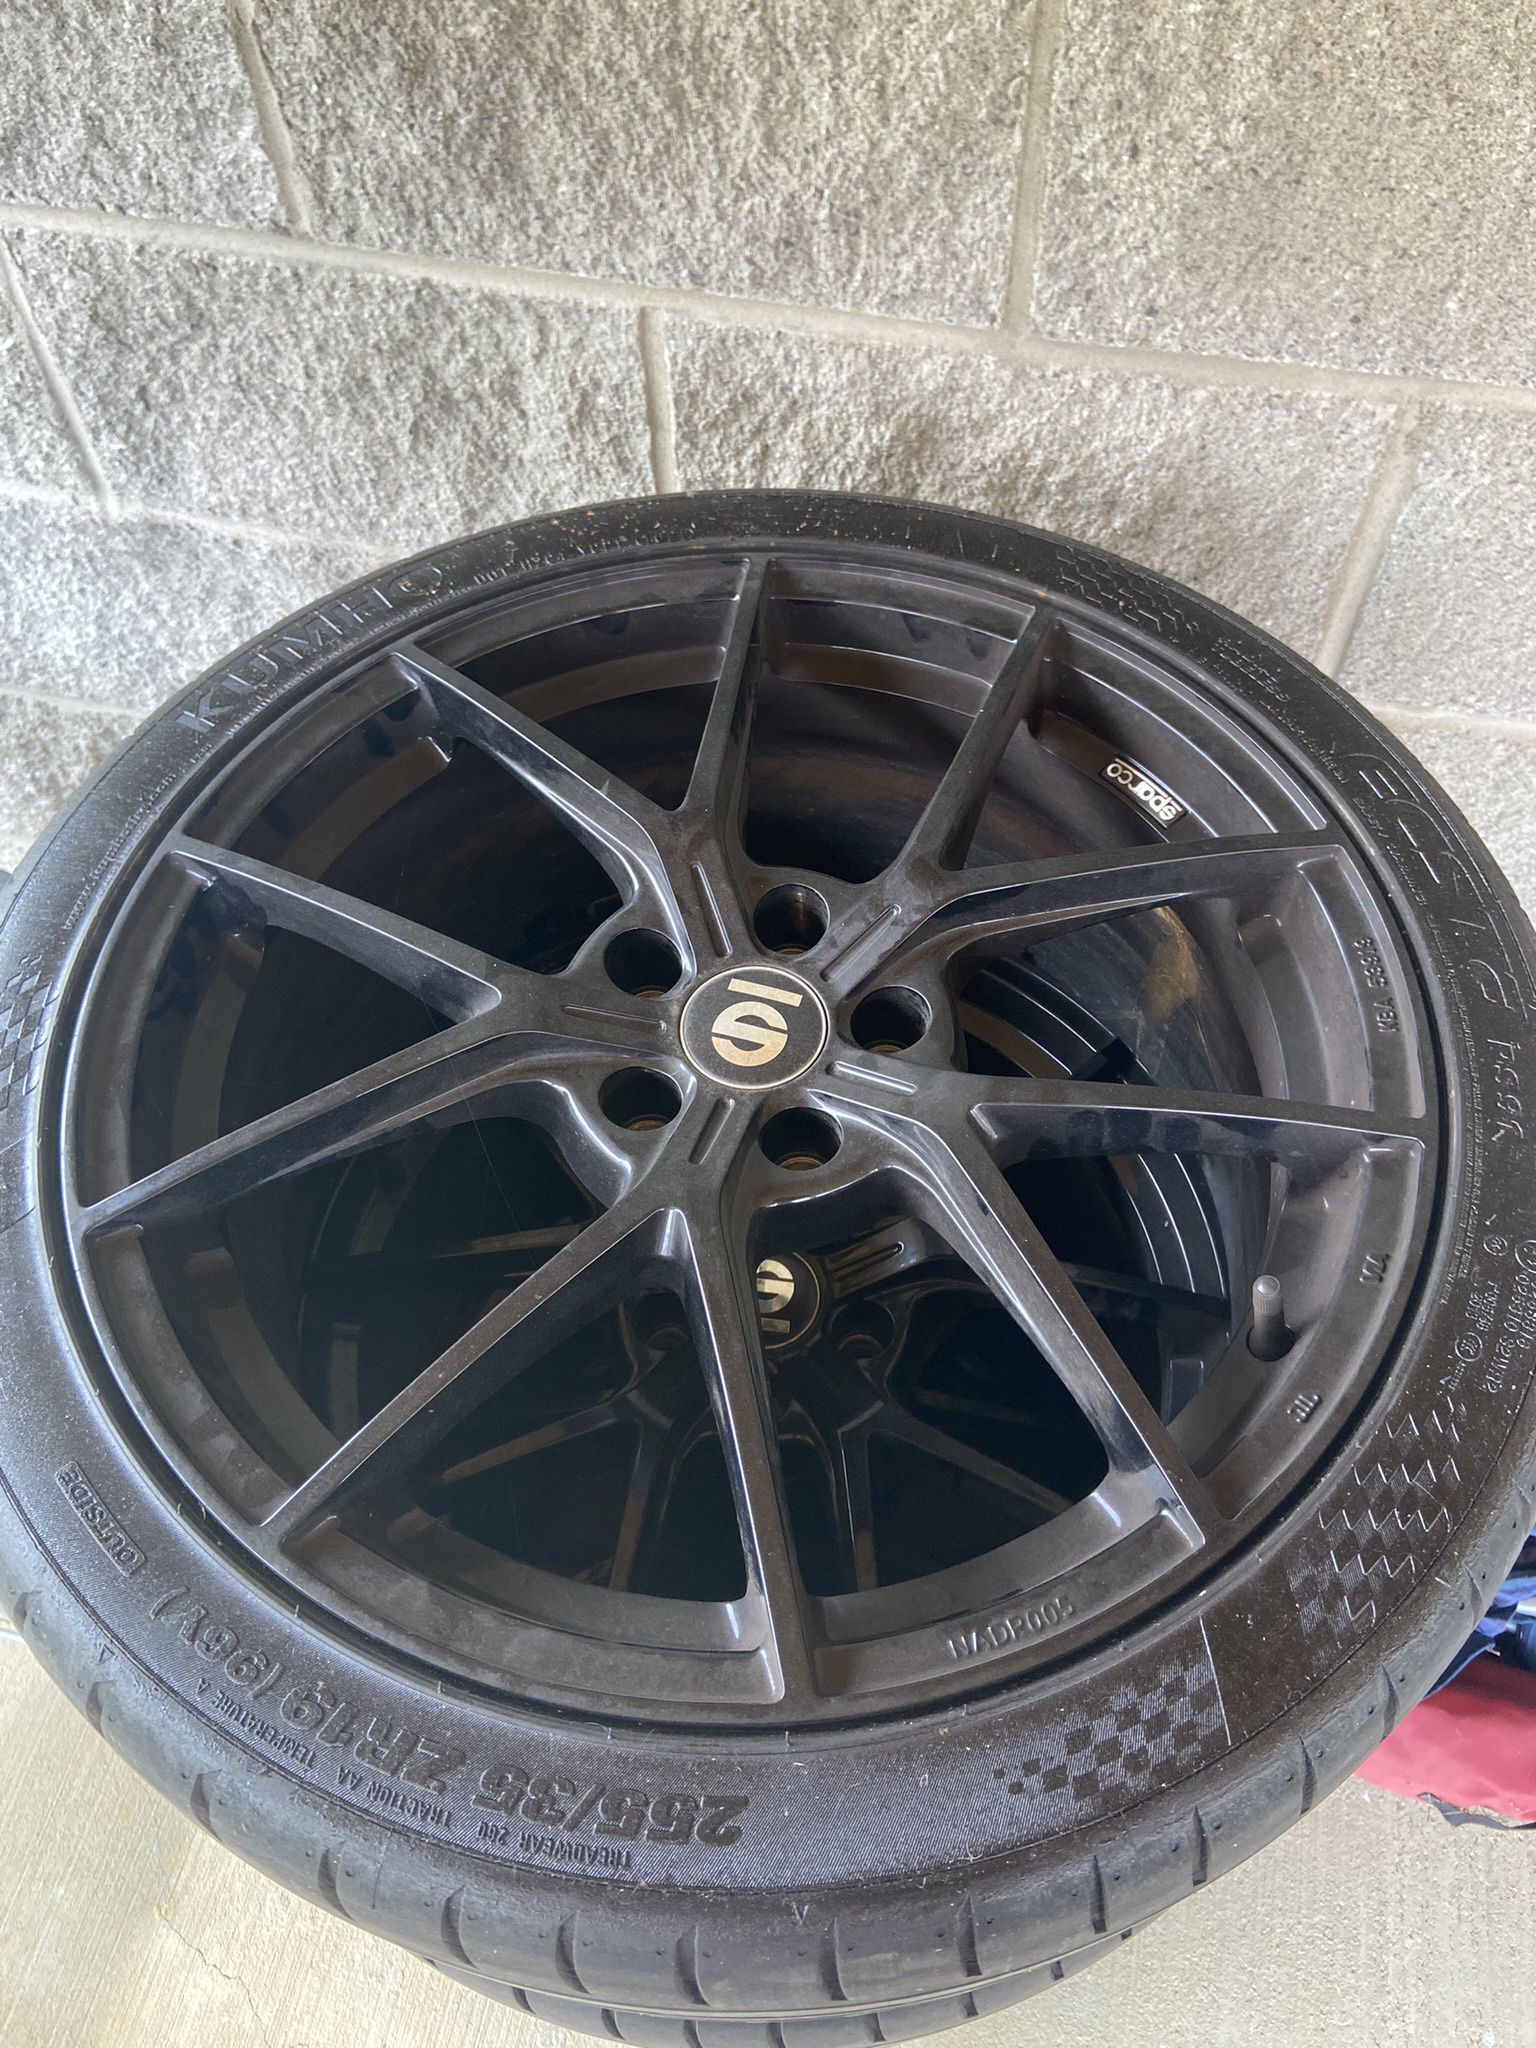 Sparco Podio 19”x8.5 Black Rims With Tires